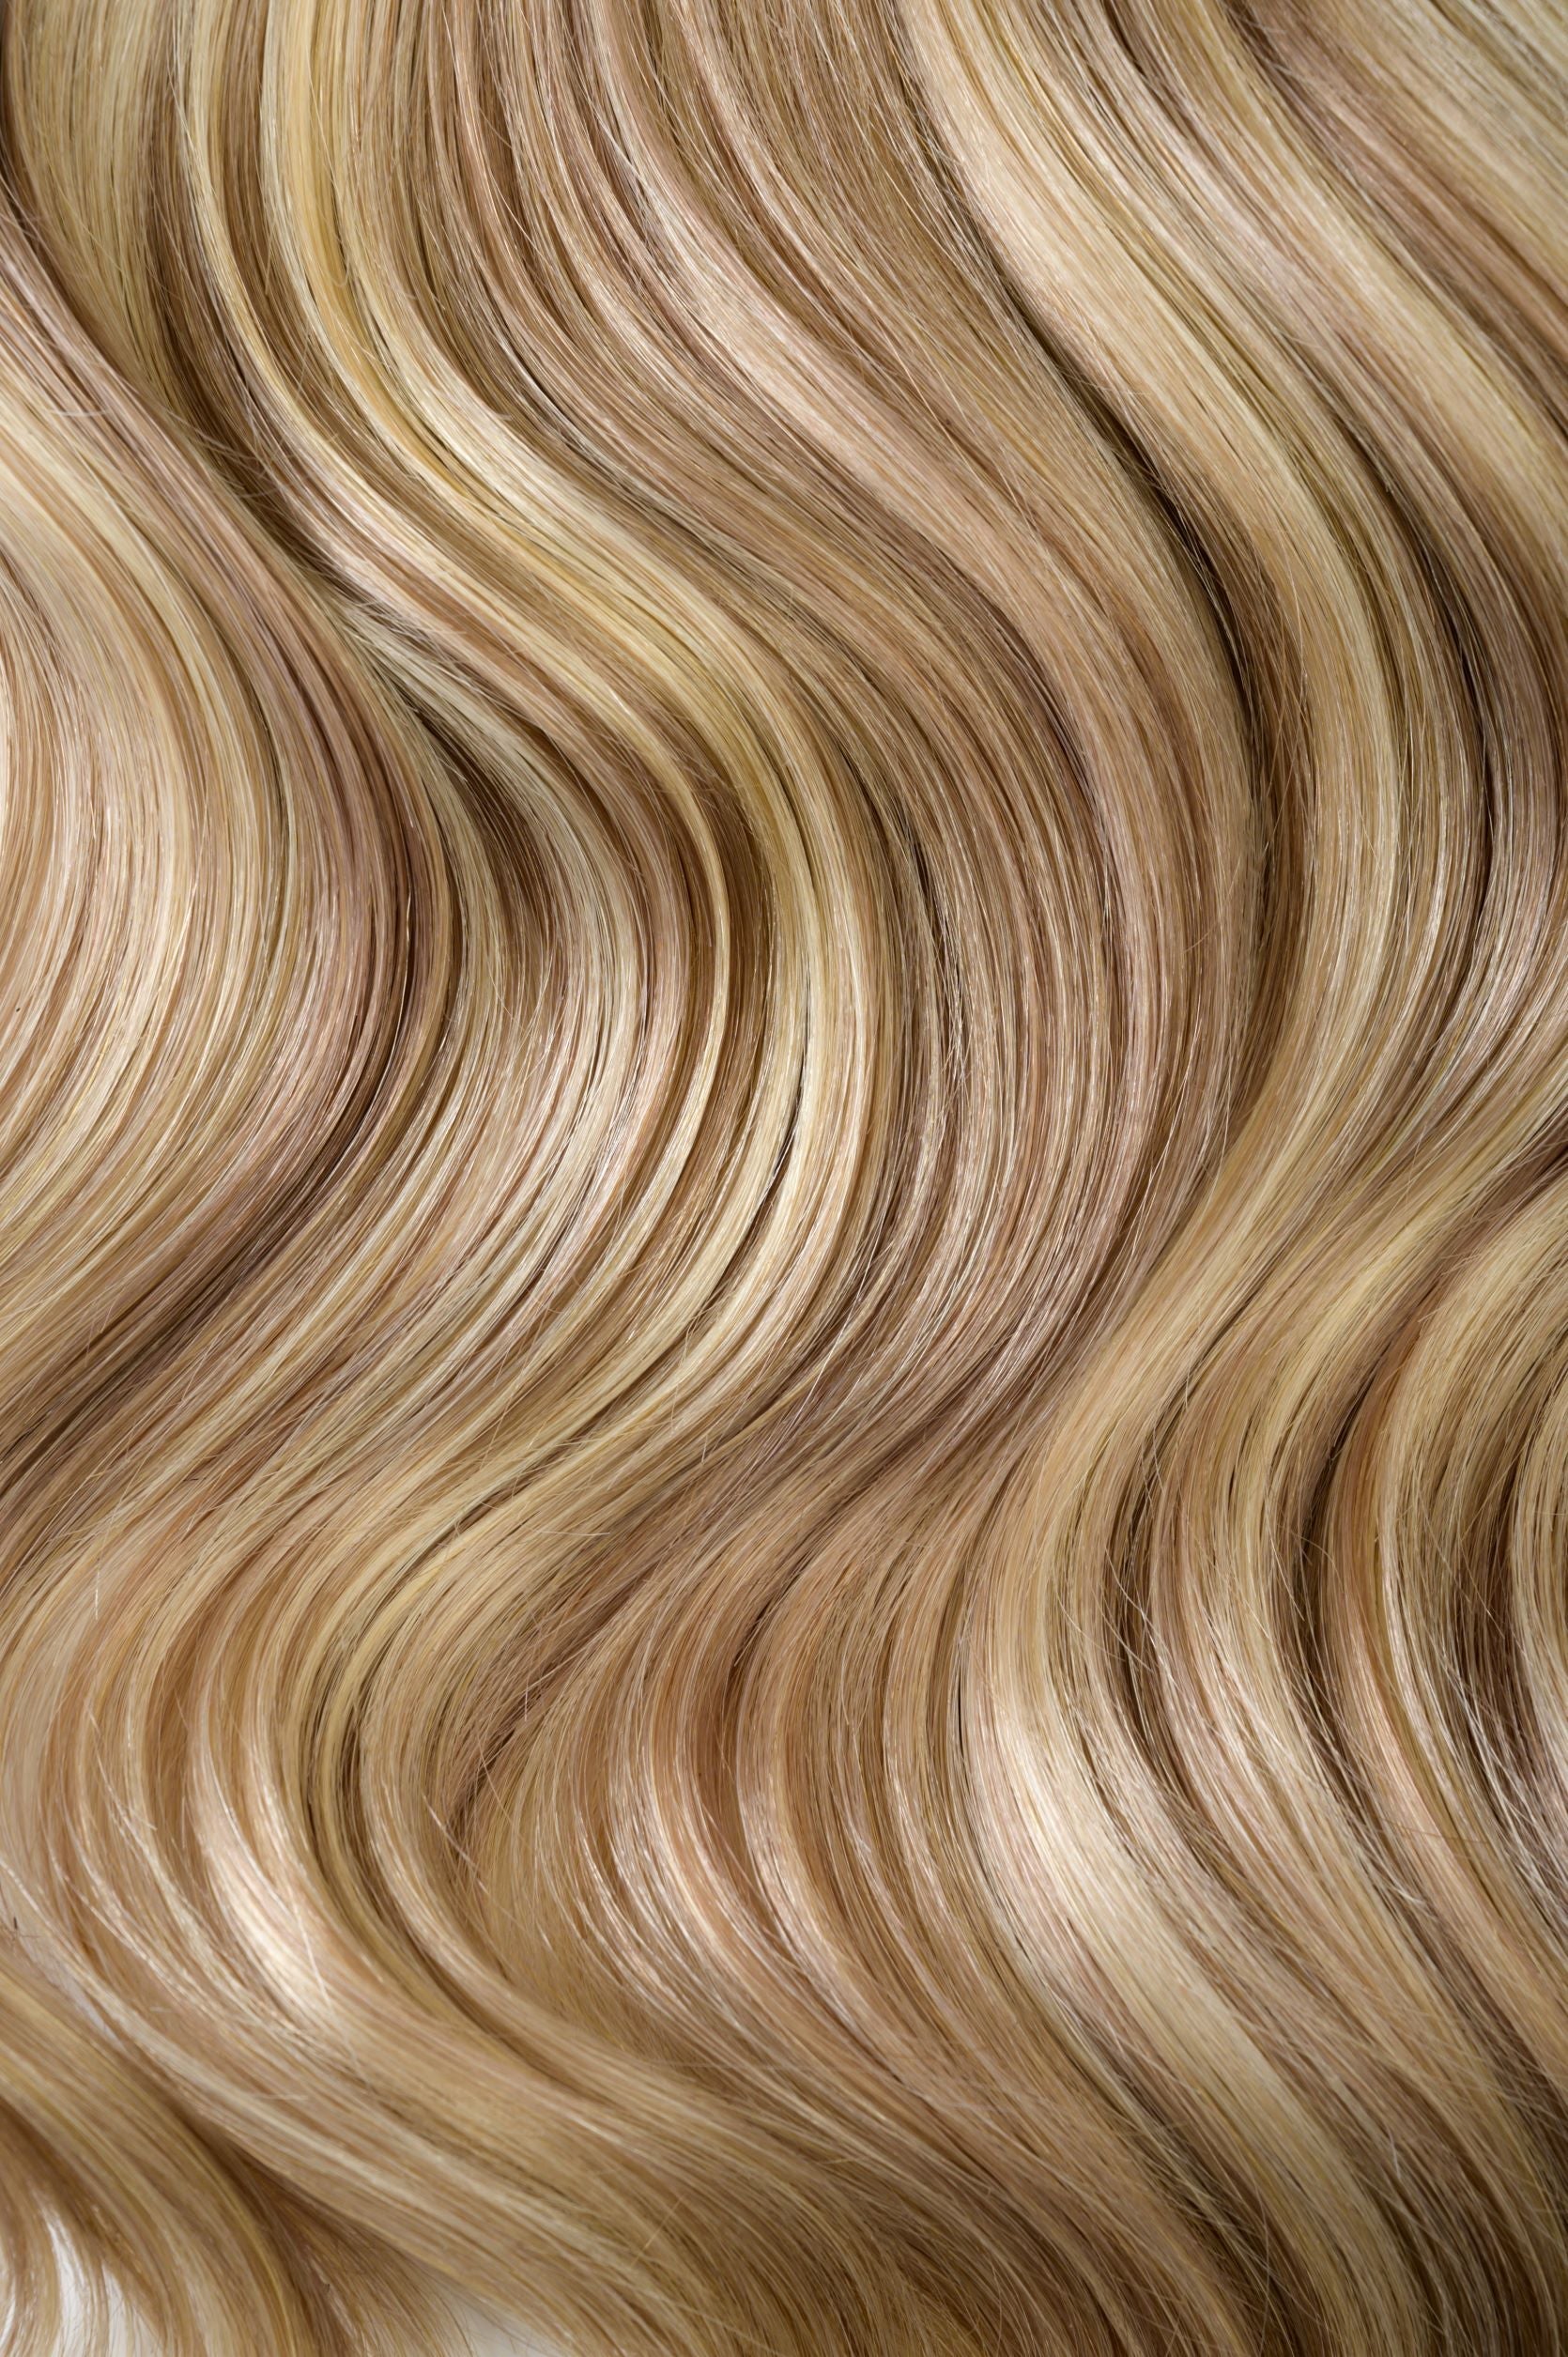 Ash Blonde Thumbnail. #18/613 Ash Blonde Highlights Seamless Clip In. Superior Hair Extensions.